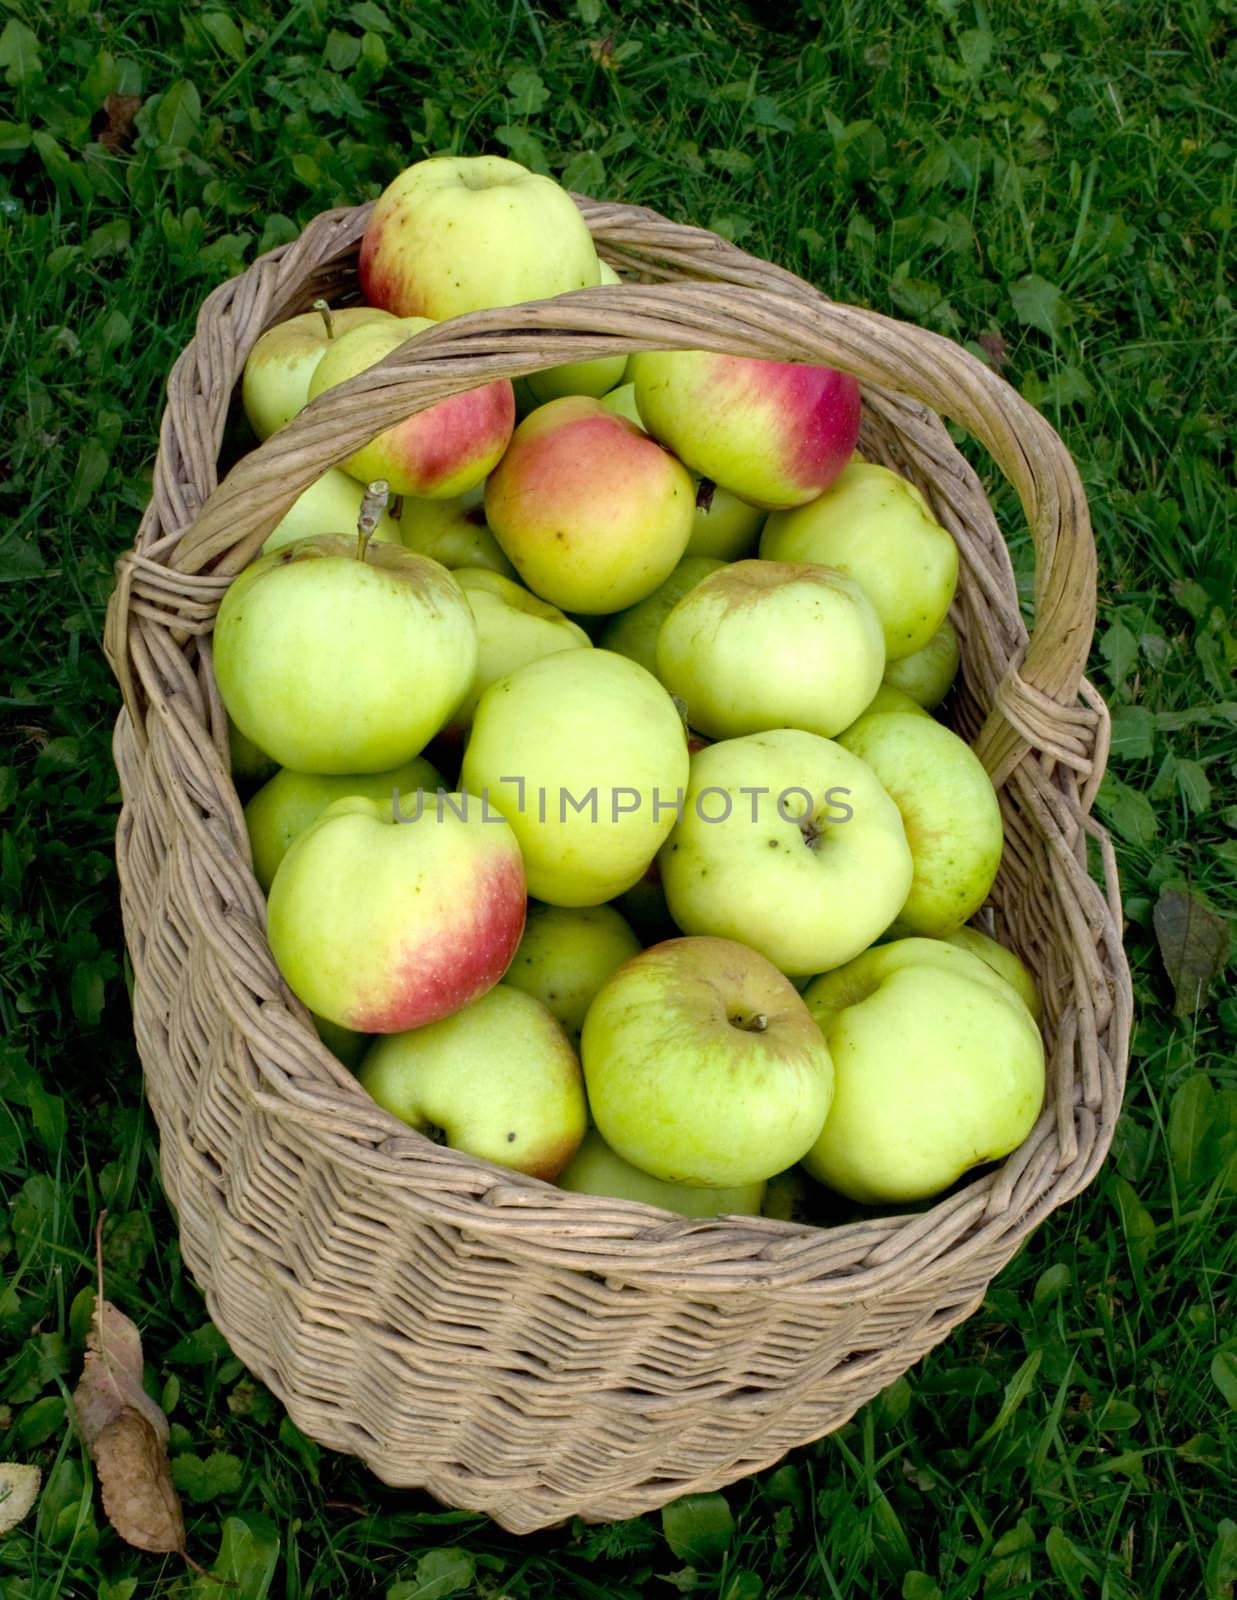 Wattled basket with a crop of apples on a green grass.